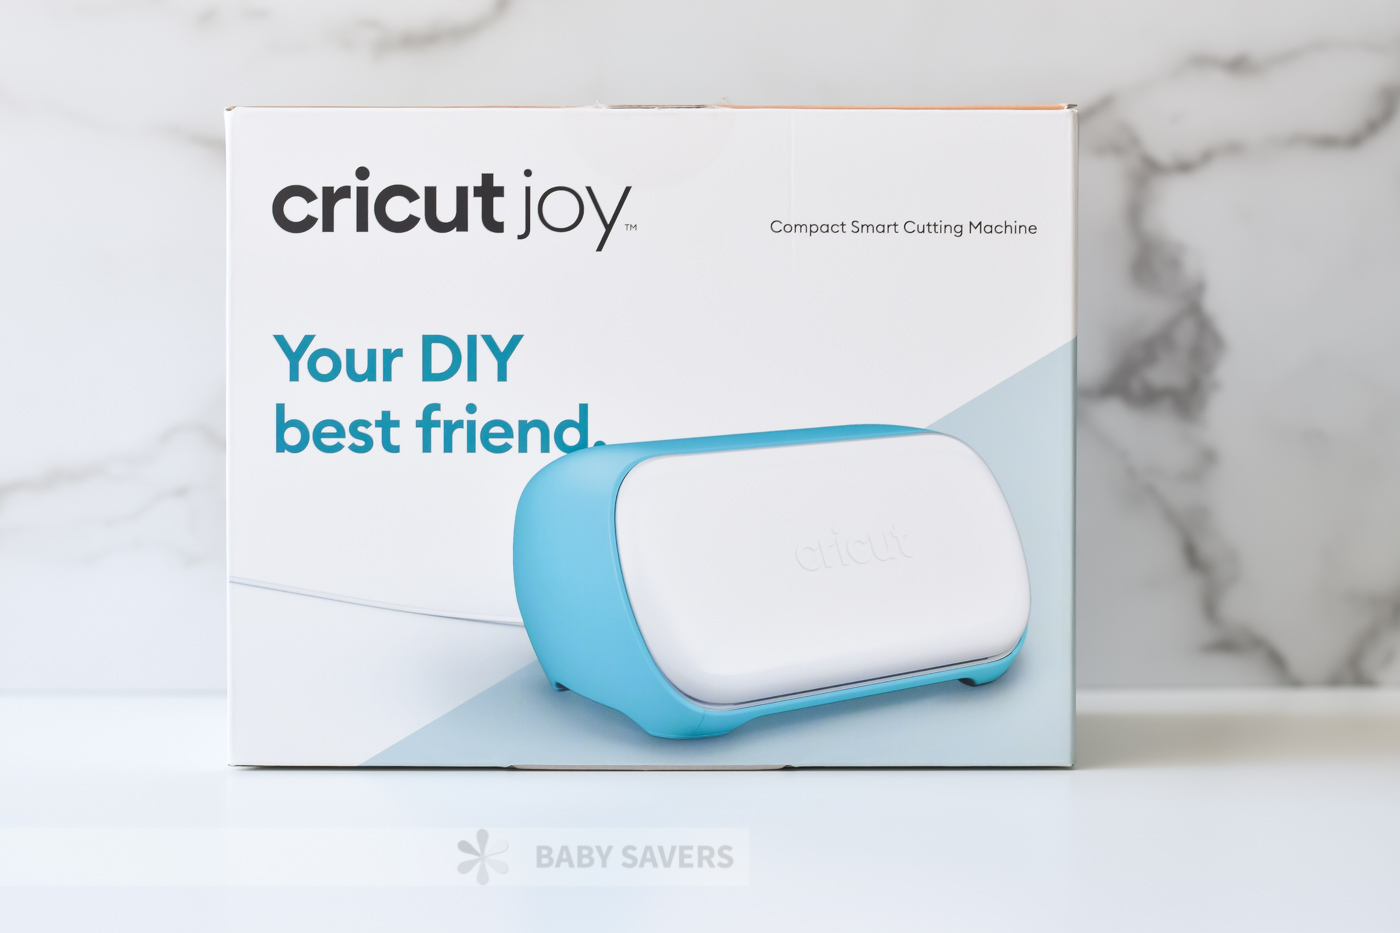 Cricut Joy reviews: cutting machine in box with text:  Your DIY best friend